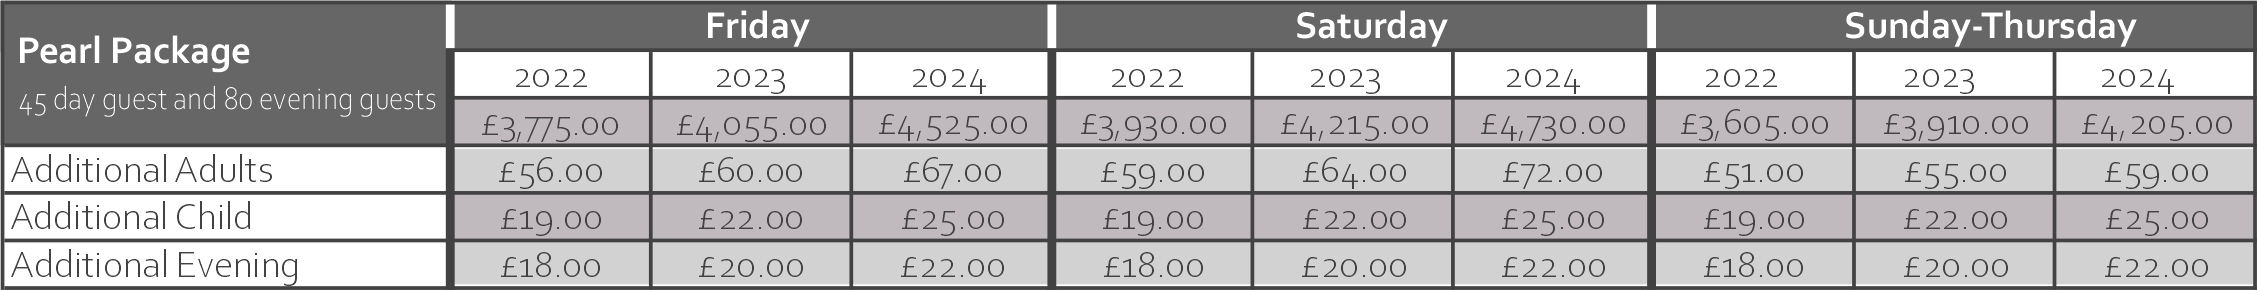 Pearl package prices The Old Rectory Handsworth